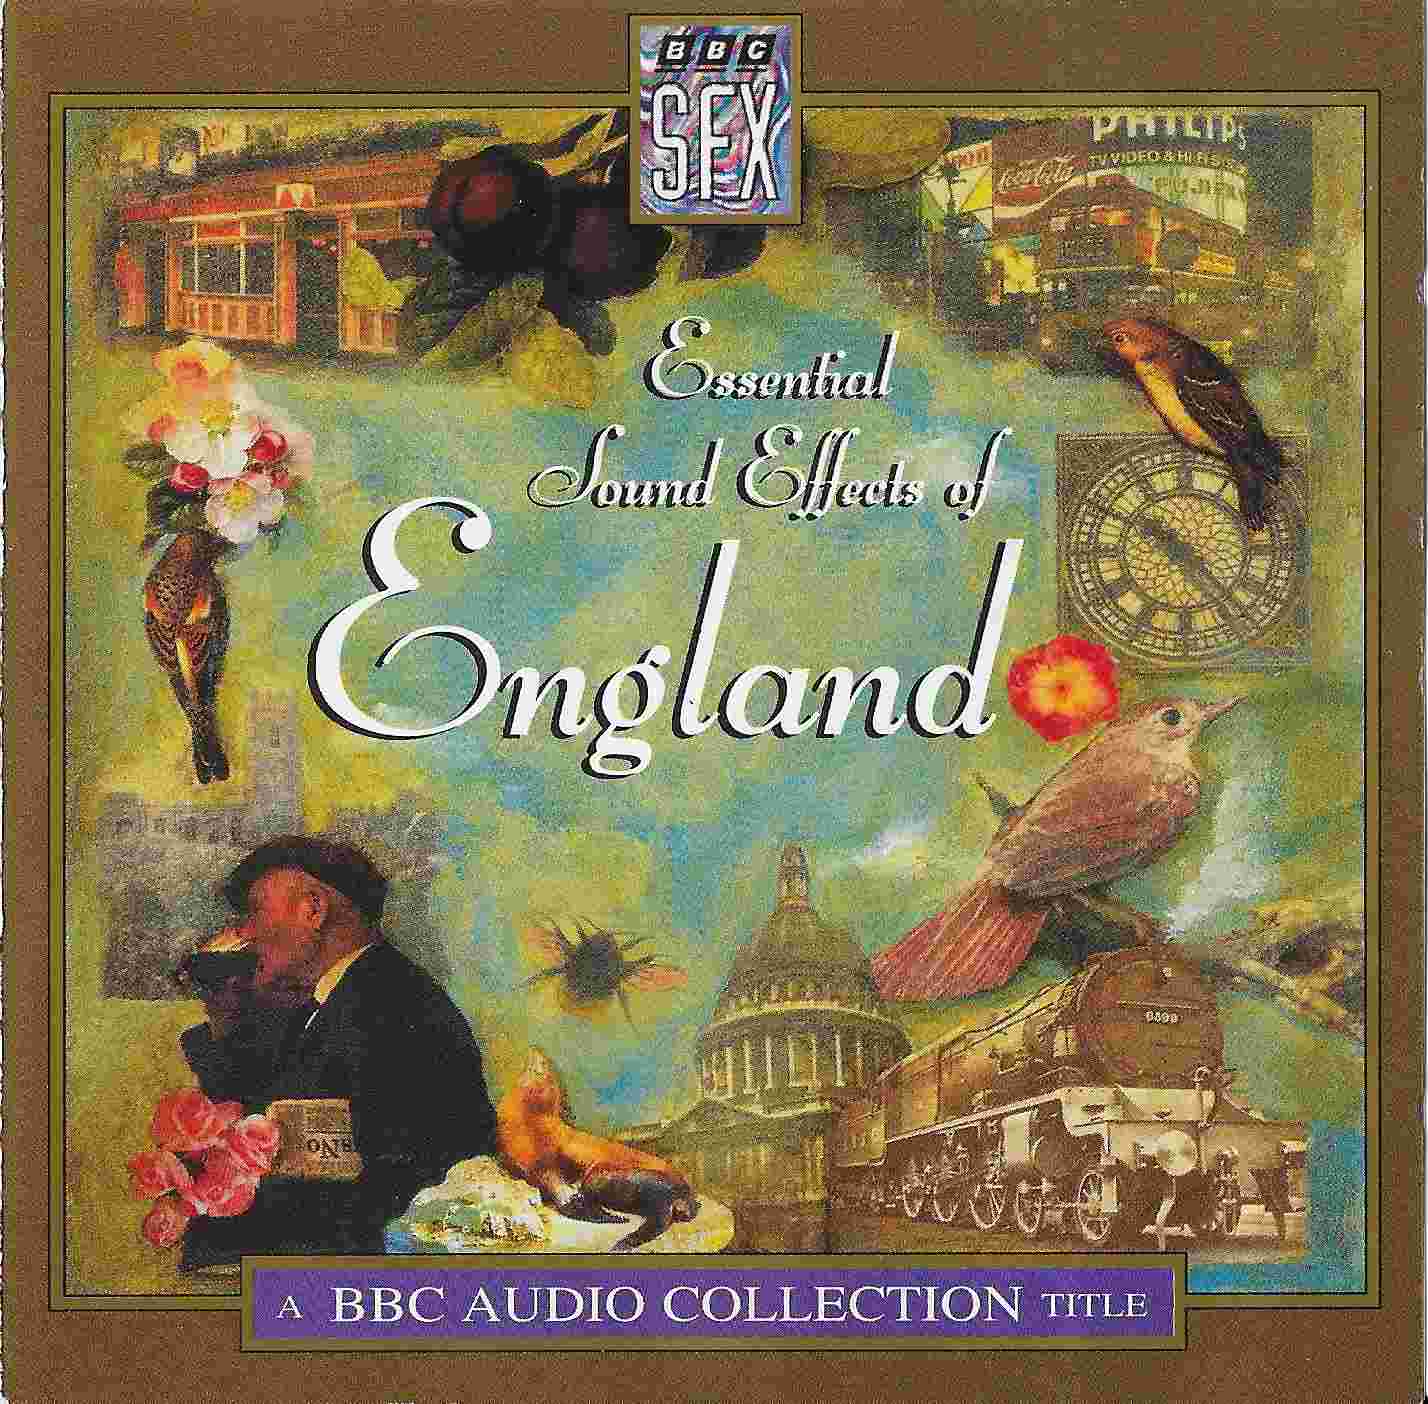 Picture of Essential sound effects of England by artist Various from the BBC cds - Records and Tapes library